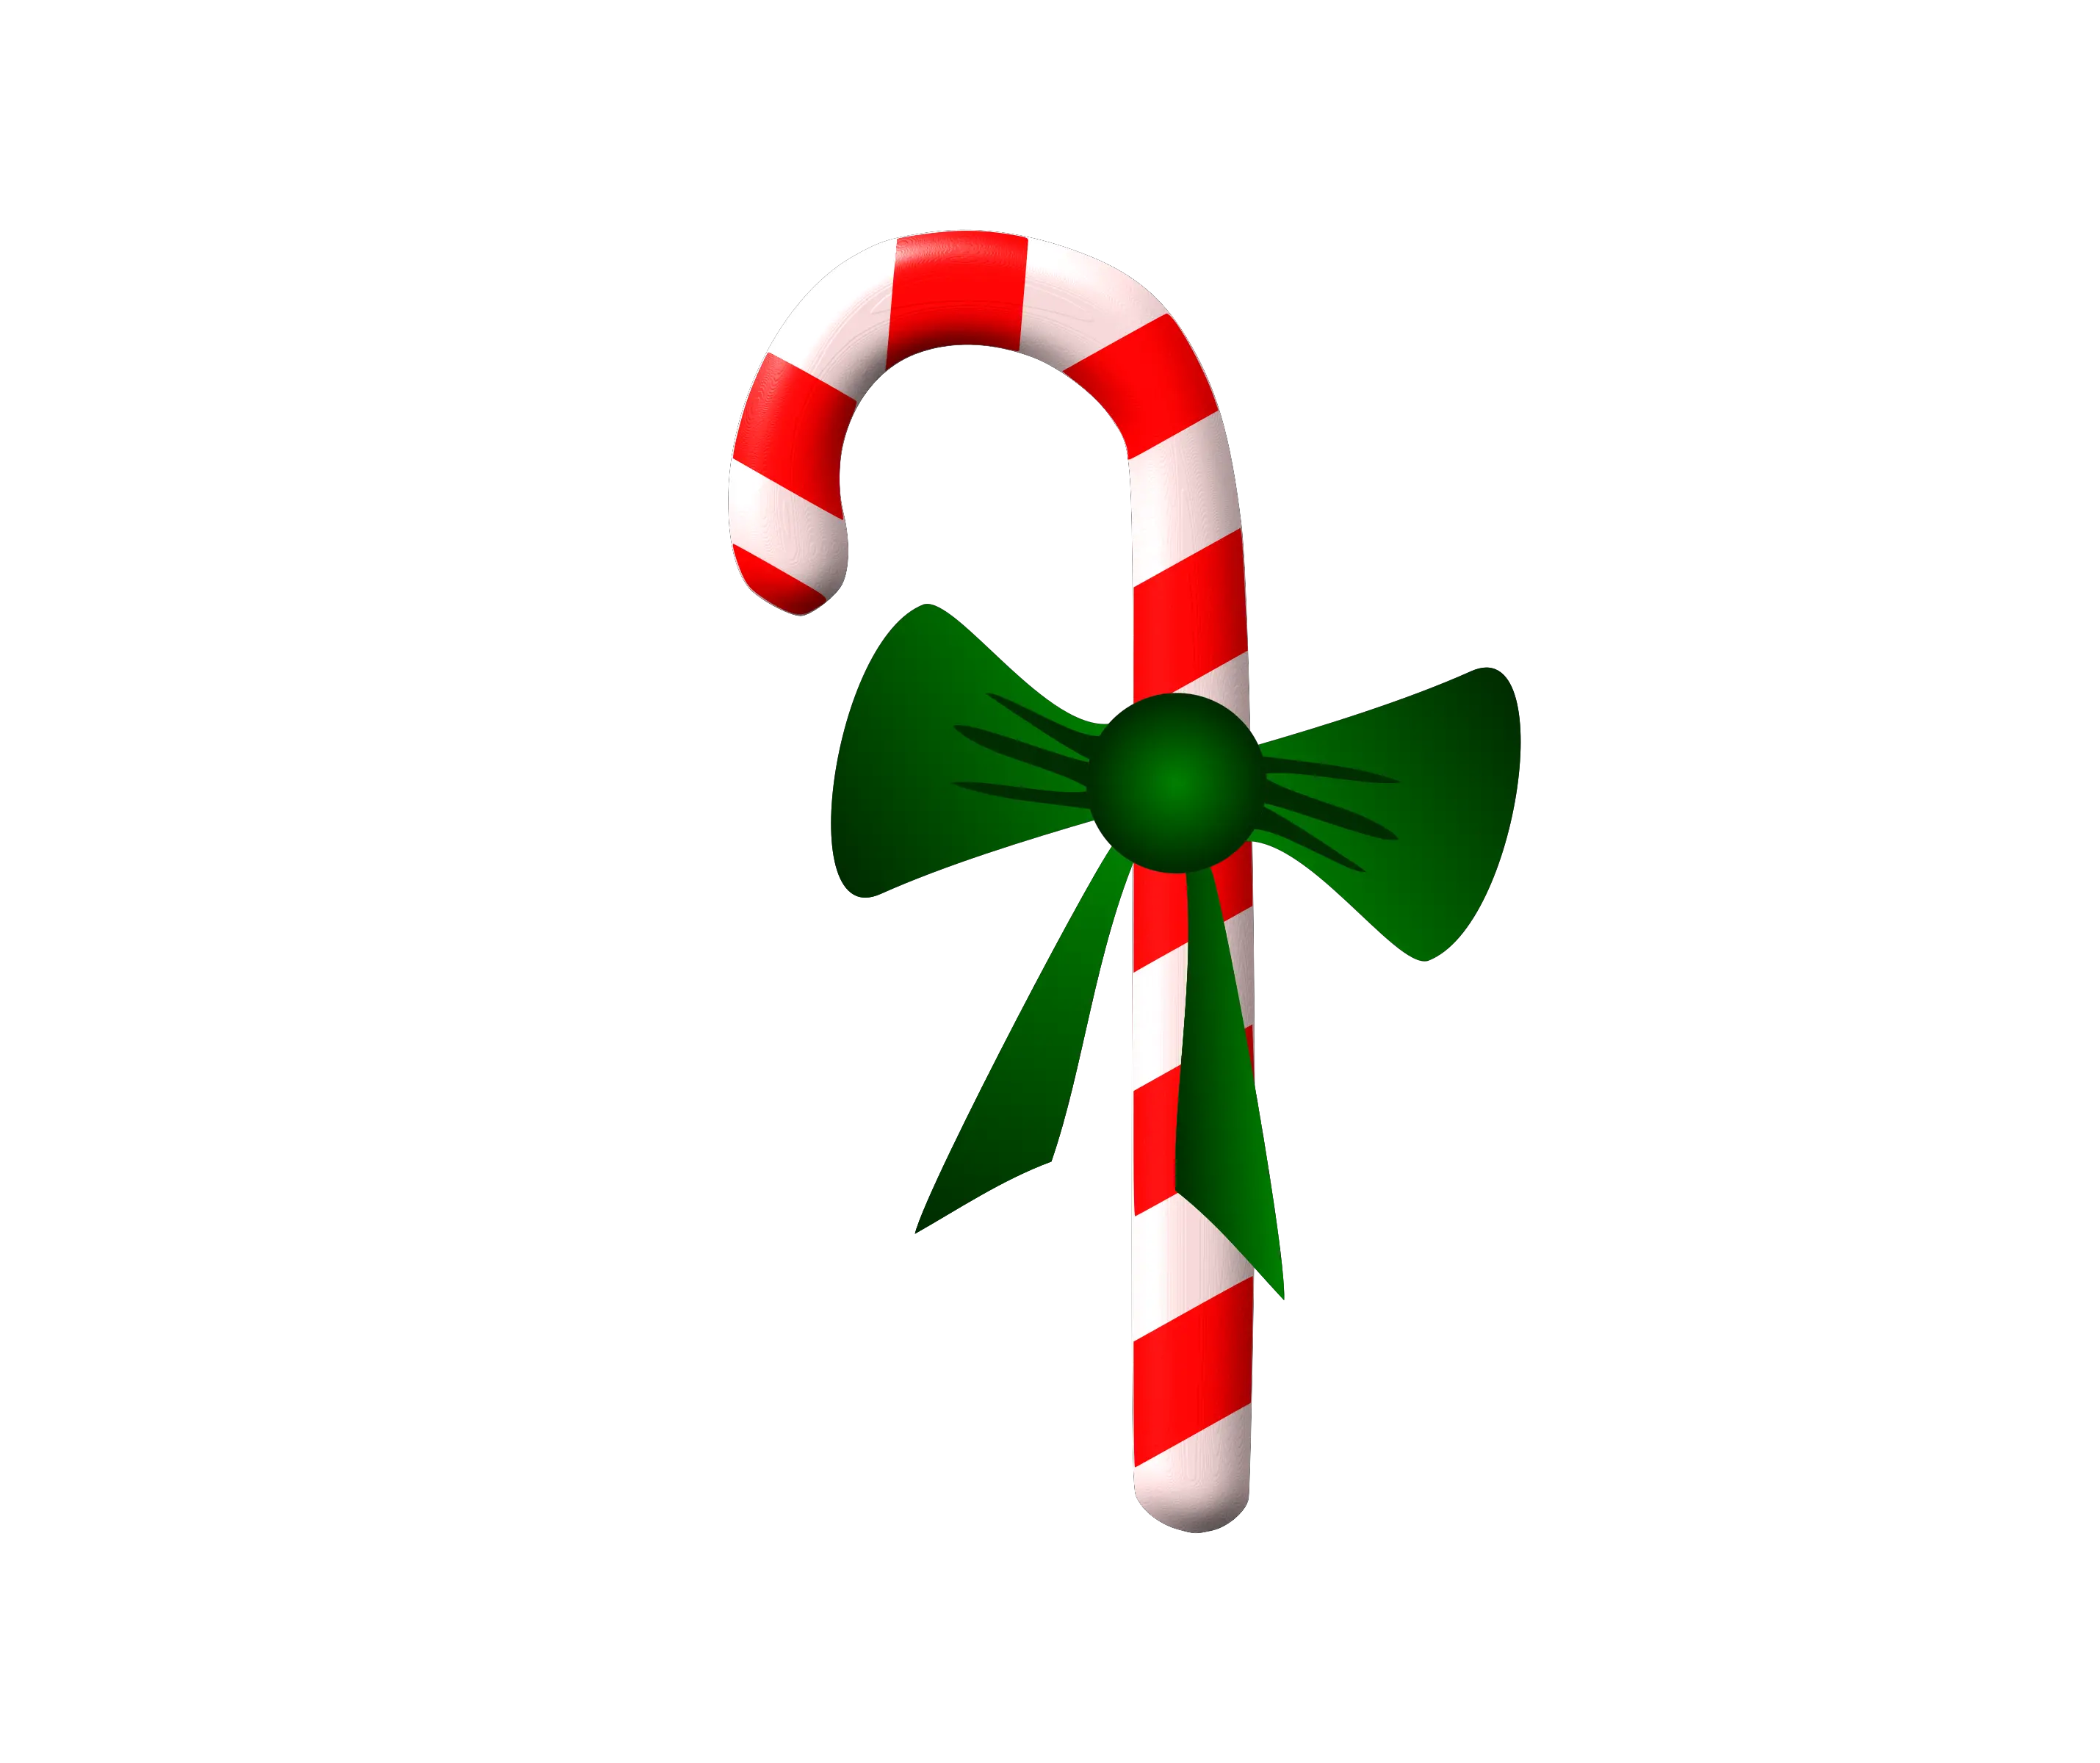 Candy Cane Clip Art Peppermint Lollipop Png Download Candy Cane Cane Png